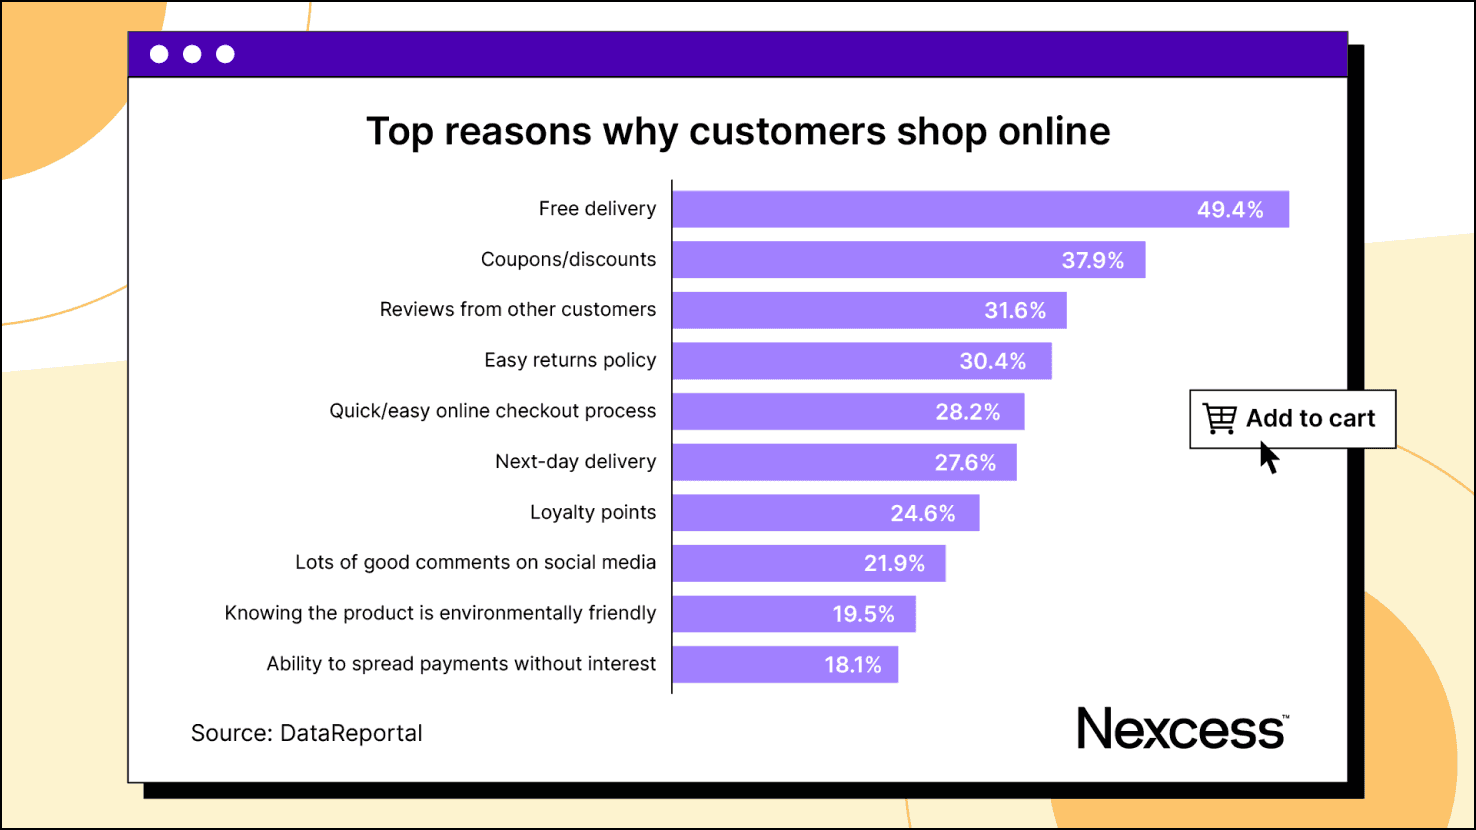 Top reasons why customers shop online.